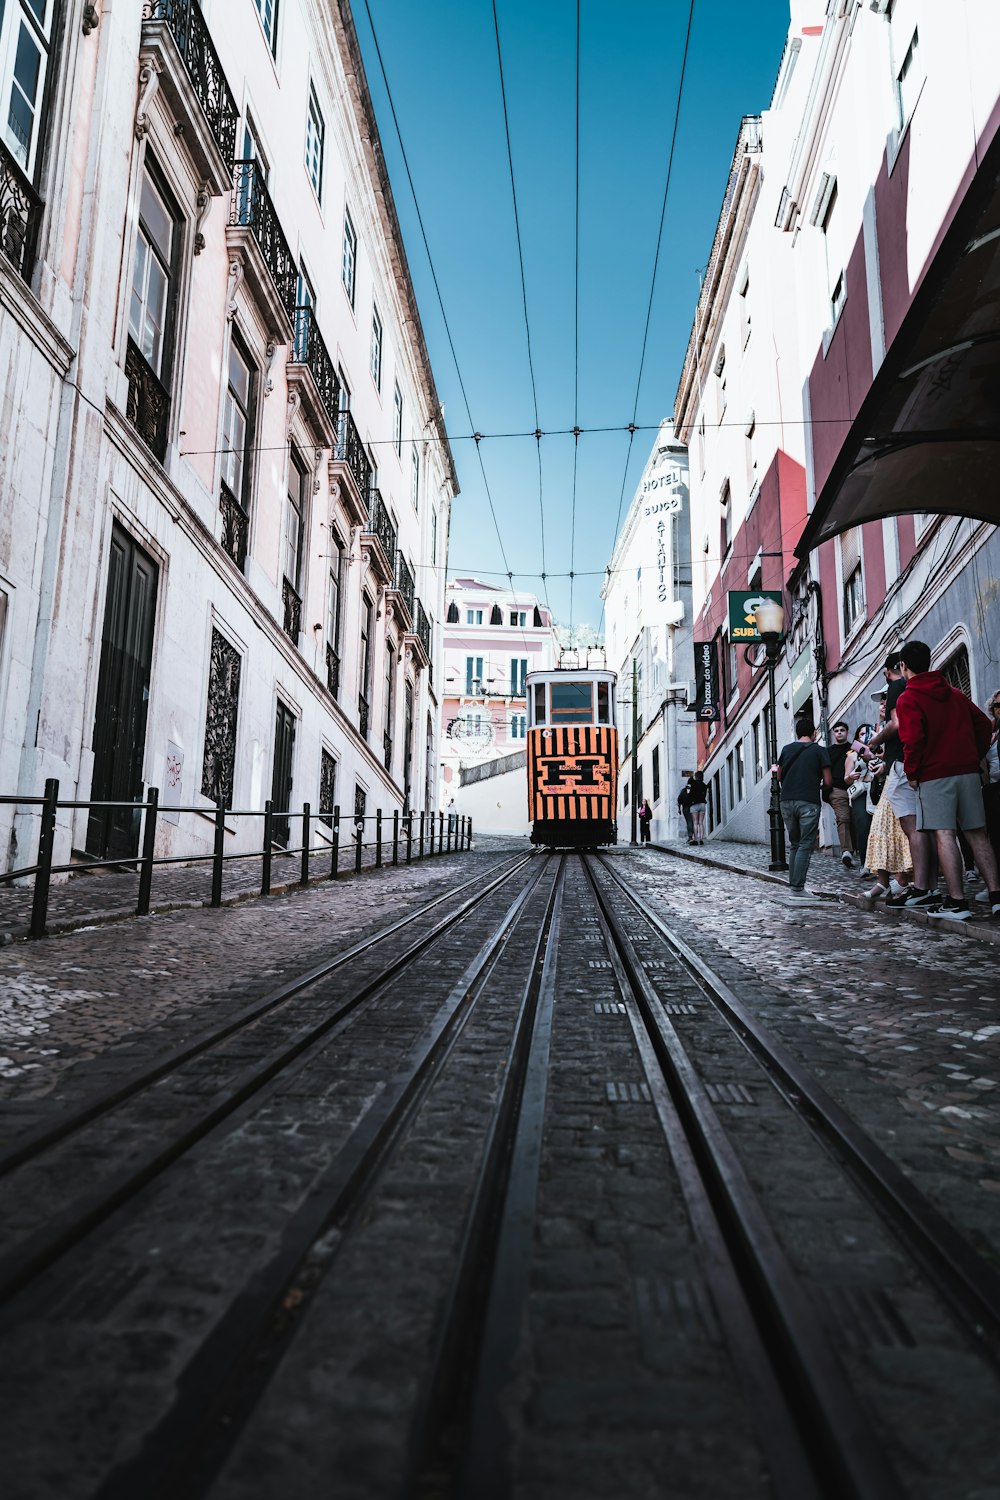 a trolley car traveling down a street next to tall buildings